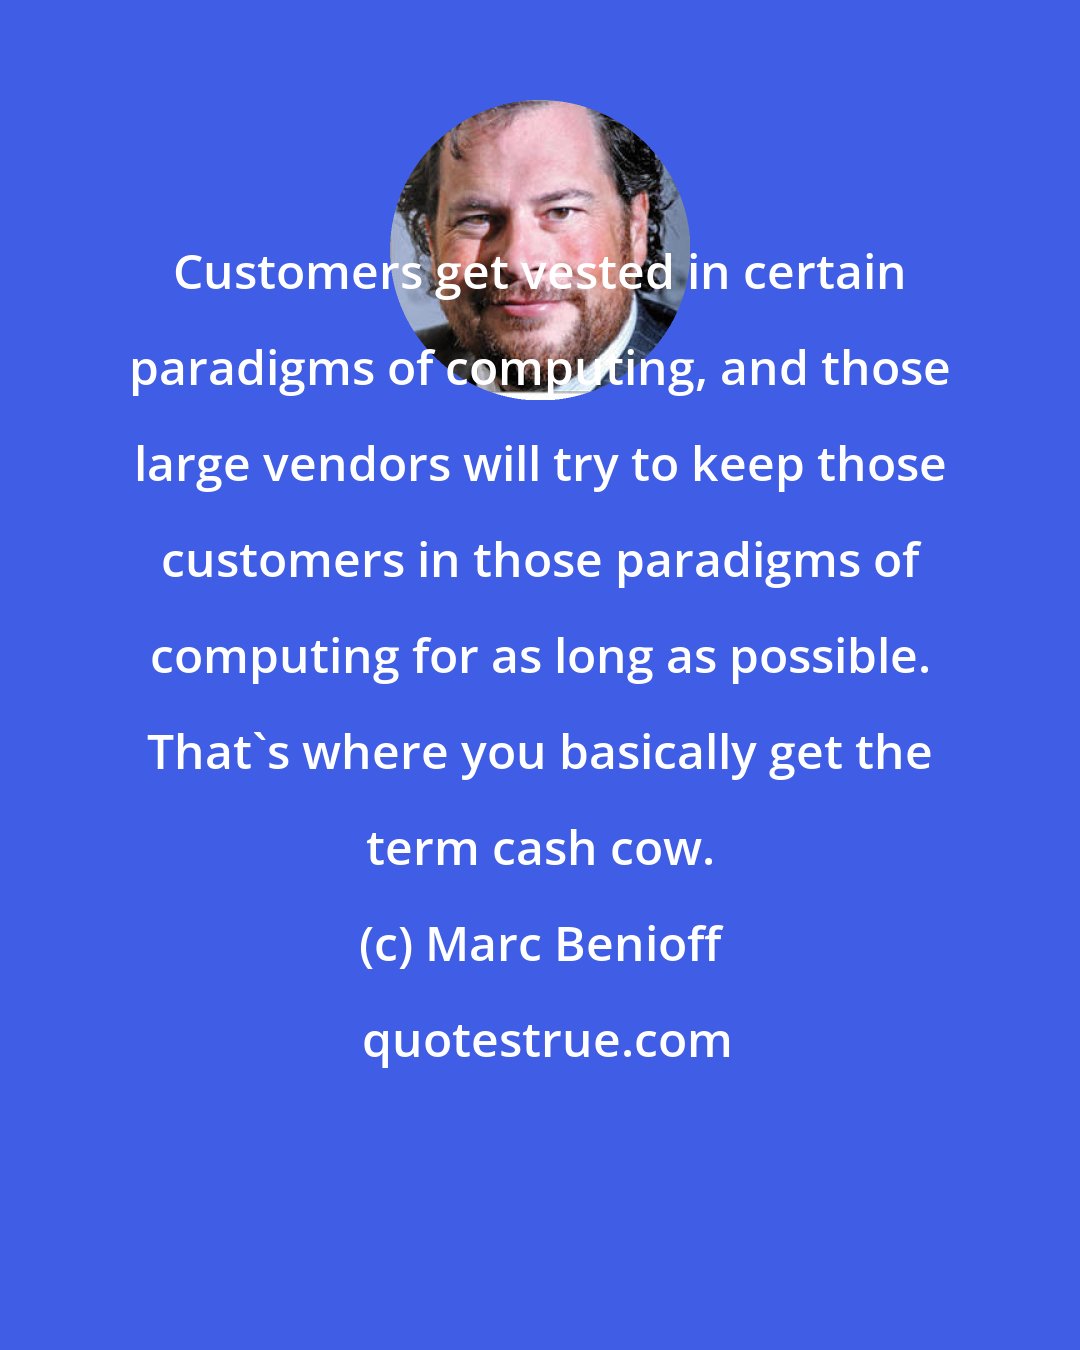 Marc Benioff: Customers get vested in certain paradigms of computing, and those large vendors will try to keep those customers in those paradigms of computing for as long as possible. That's where you basically get the term cash cow.